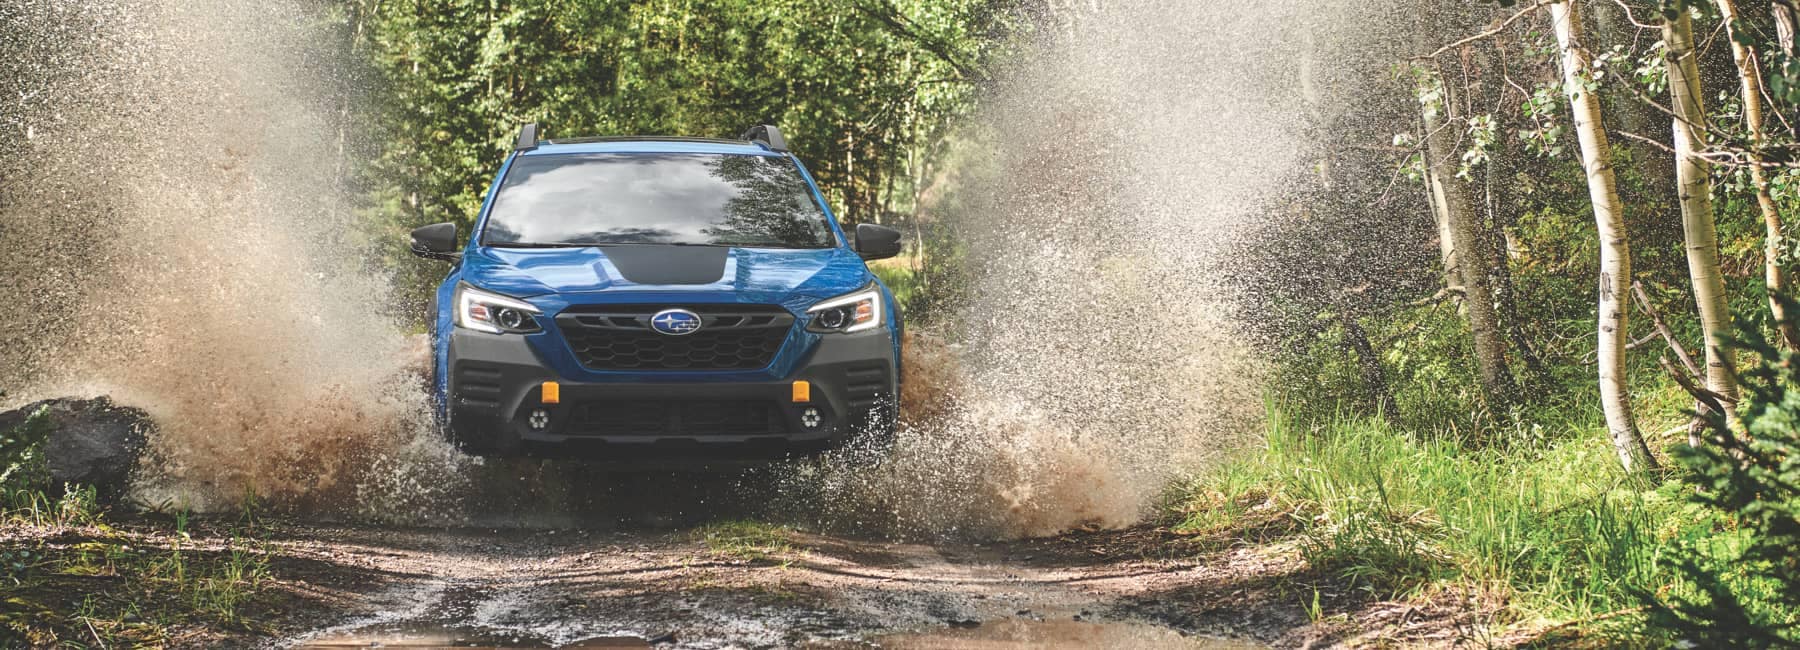 2022 Subaru Outback- front view- driving trough large puddle in forest-spalshes-blue_black_